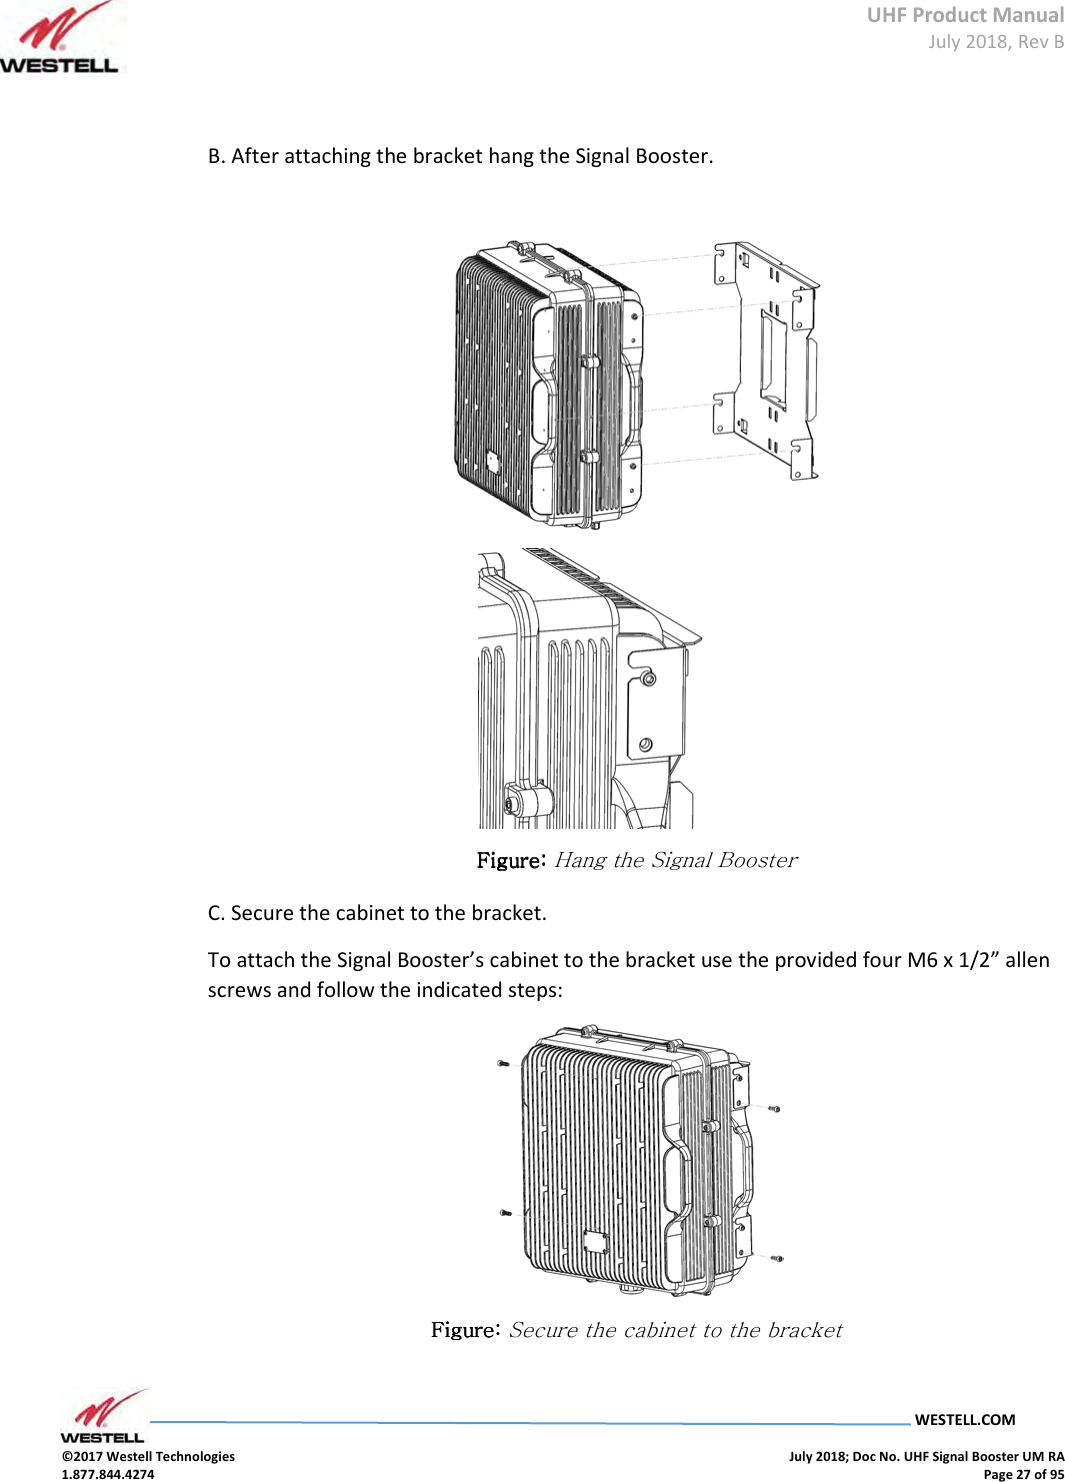 UHF Product Manual July 2018, Rev B   WESTELL.COM  ©2017 Westell Technologies    July 2018; Doc No. UHF Signal Booster UM RA 1.877.844.4274    Page 27 of 95   B. After attaching the bracket hang the Signal Booster.    Figure: Figure: Figure: Figure: Hang the Signal Booster C. Secure the cabinet to the bracket. To attach the Signal Booster’s cabinet to the bracket use the provided four M6 x 1/2” allen screws and follow the indicated steps:  Figure: Figure: Figure: Figure: Secure the cabinet to the bracket     